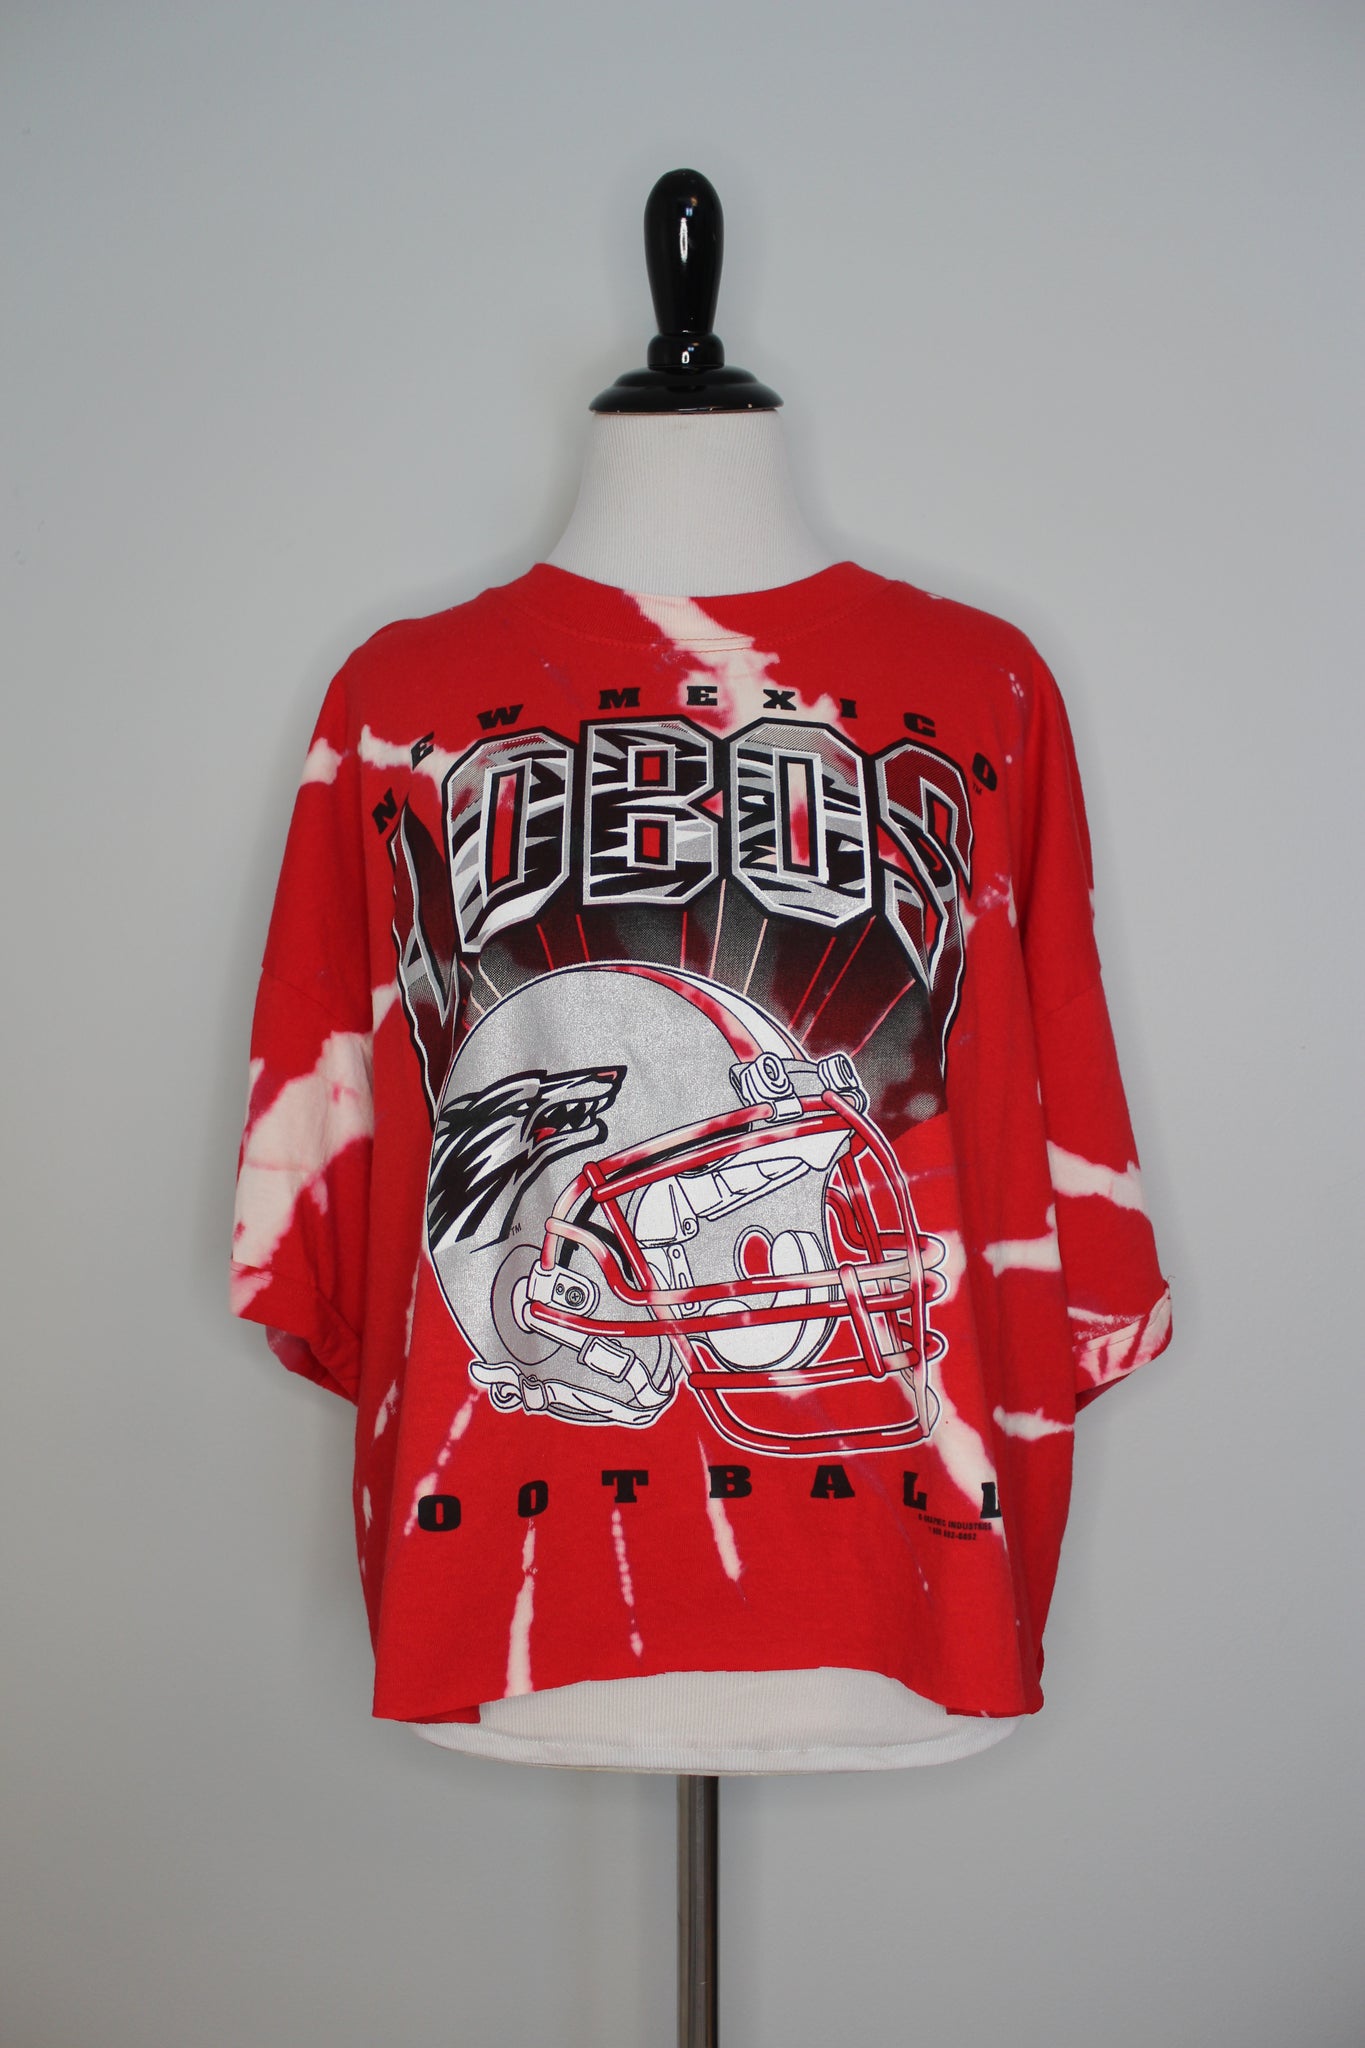 New Mexico University Cropped Spiral Bleach Shirt